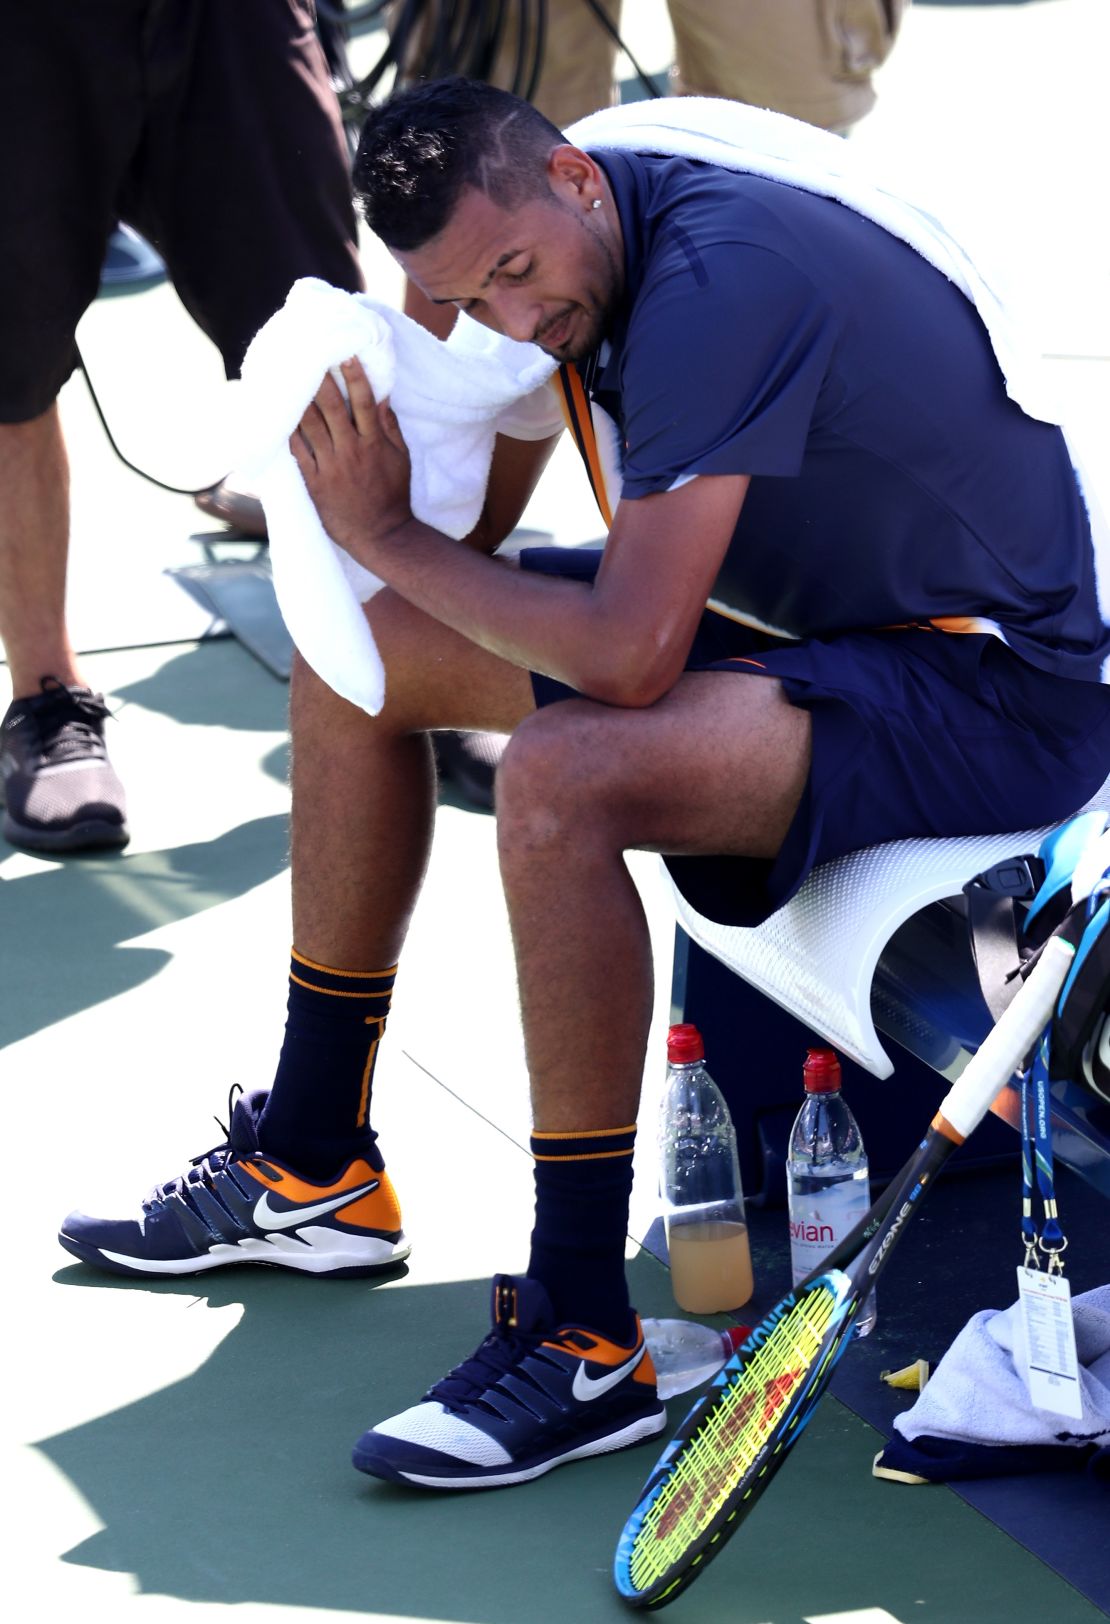 Nick Kyrgios of Australia takes a break during his men's singles second round match against Pierre-Hugues Herbert on Day Four of the 2018 US Open.